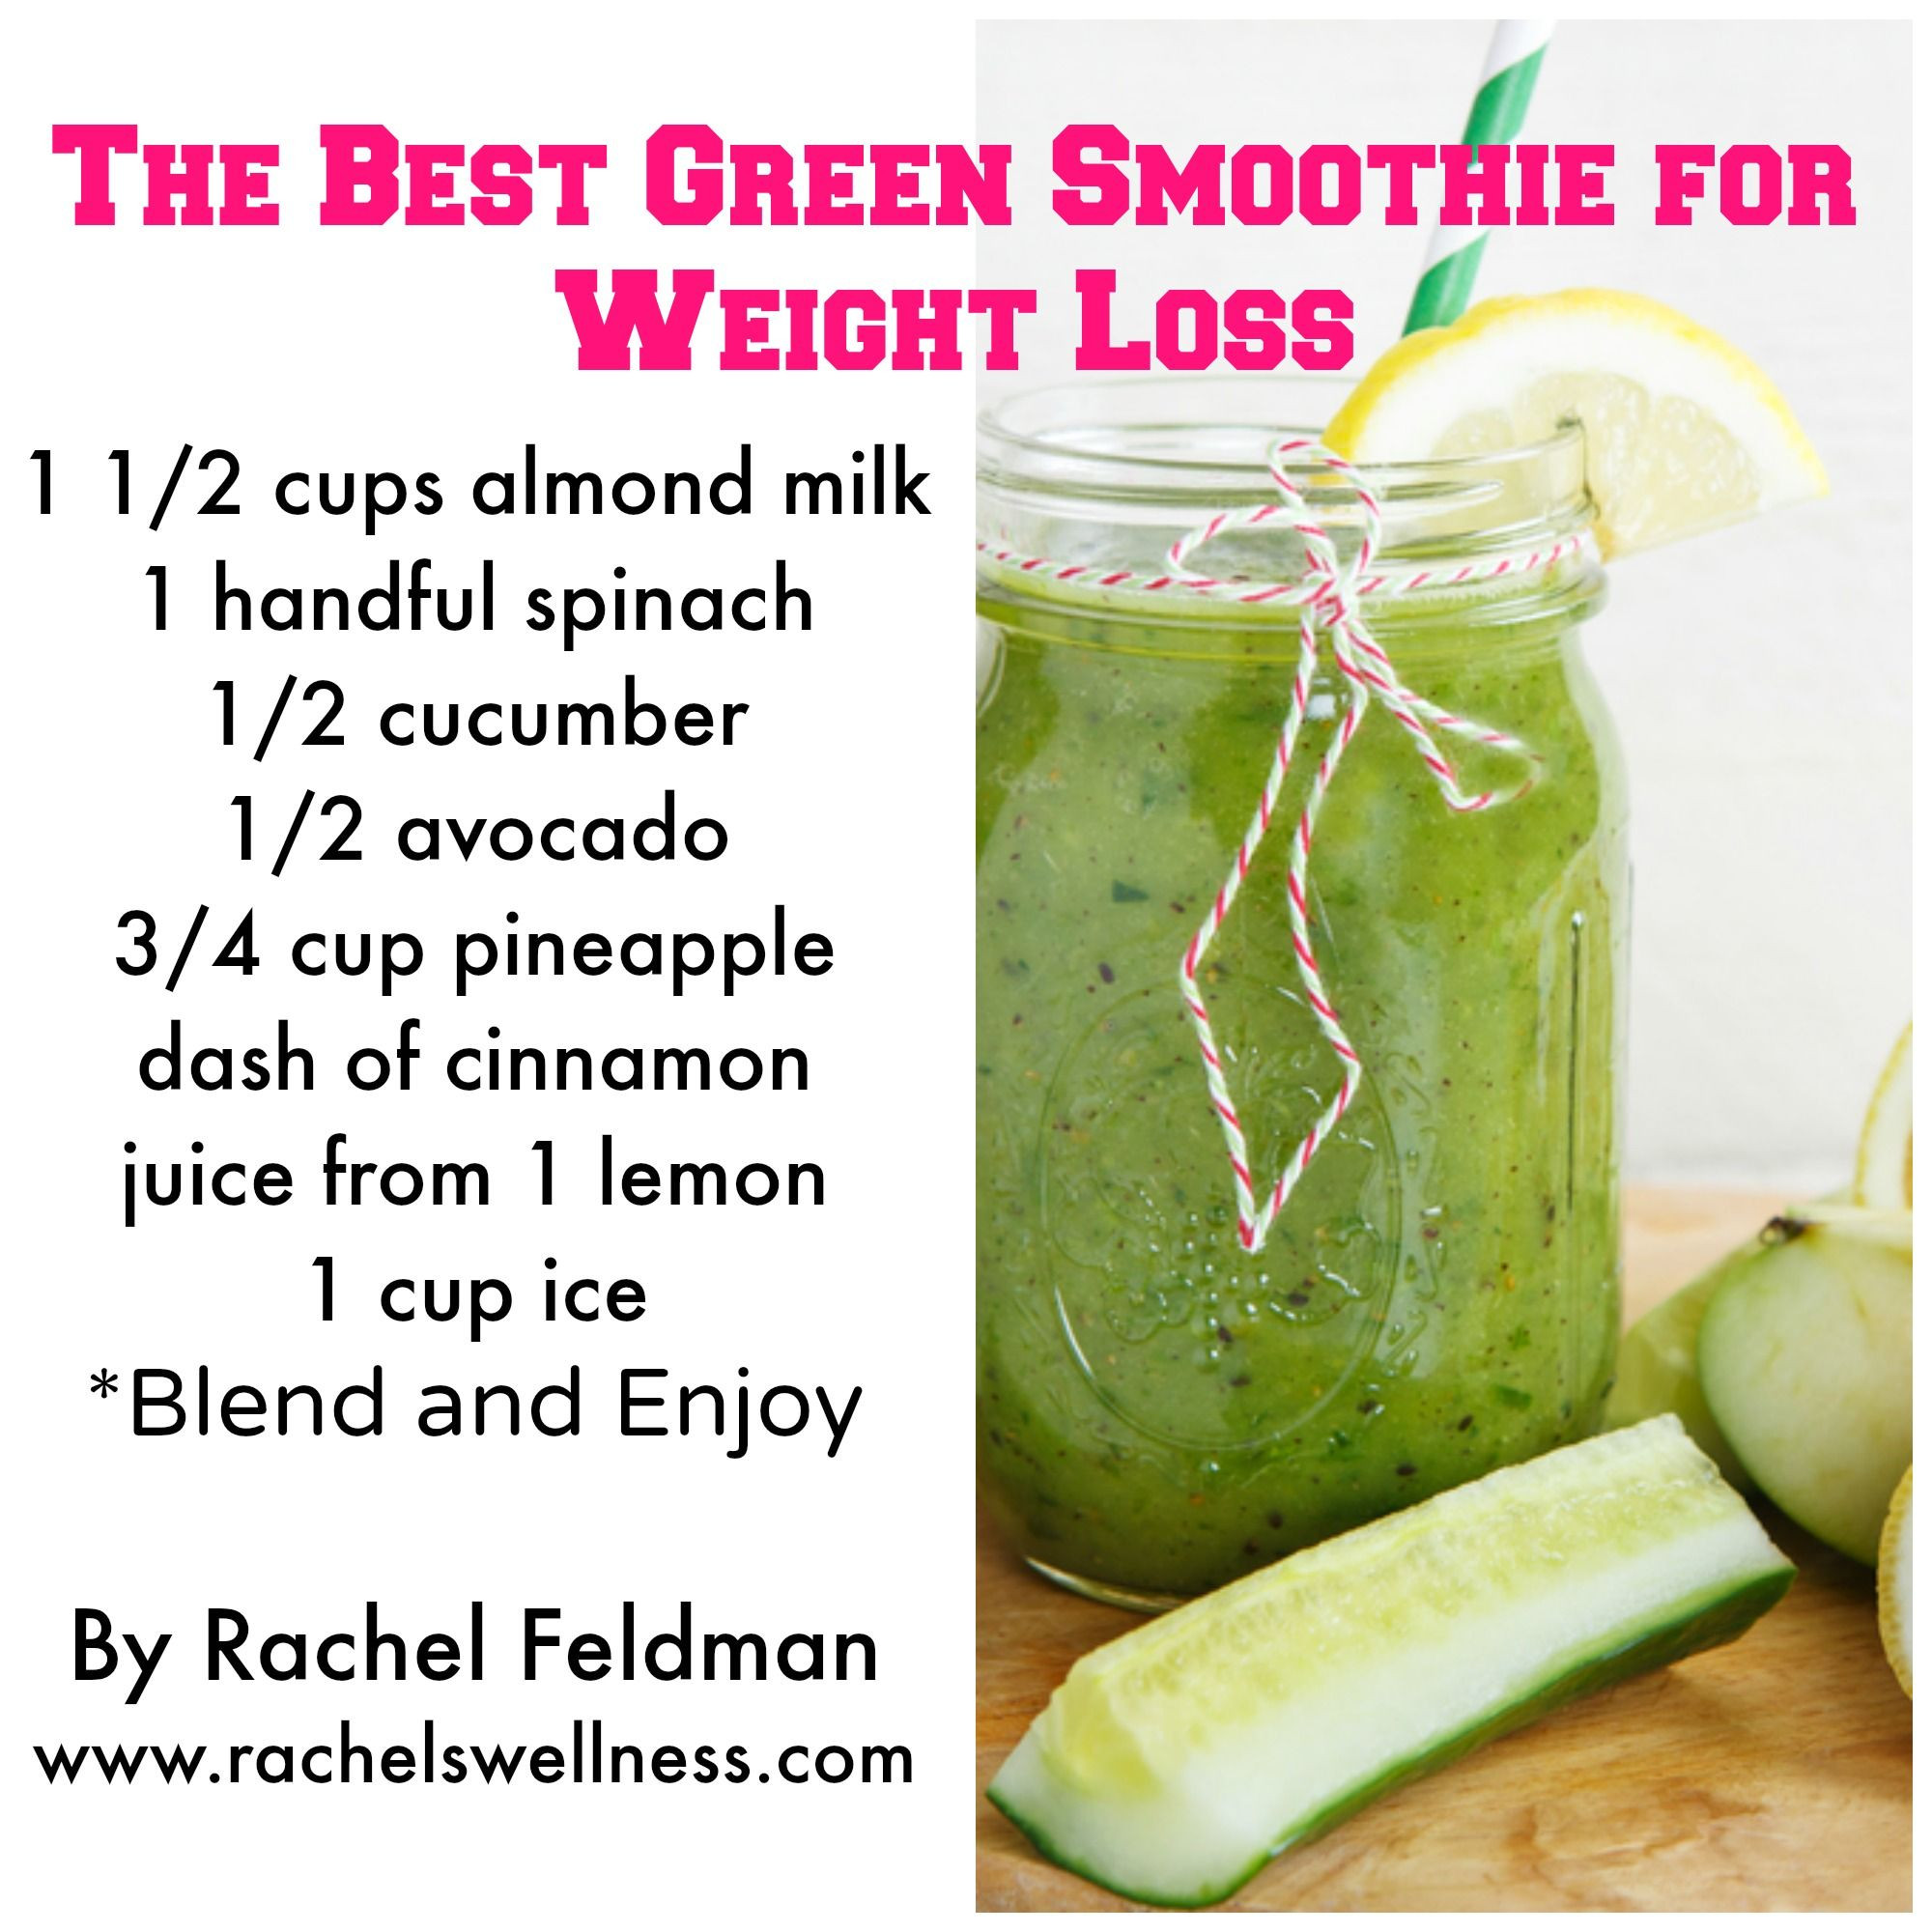 Veggie Smoothie Recipes For Weight Loss
 7 Healthy Green Smoothie Recipes For Weight Loss